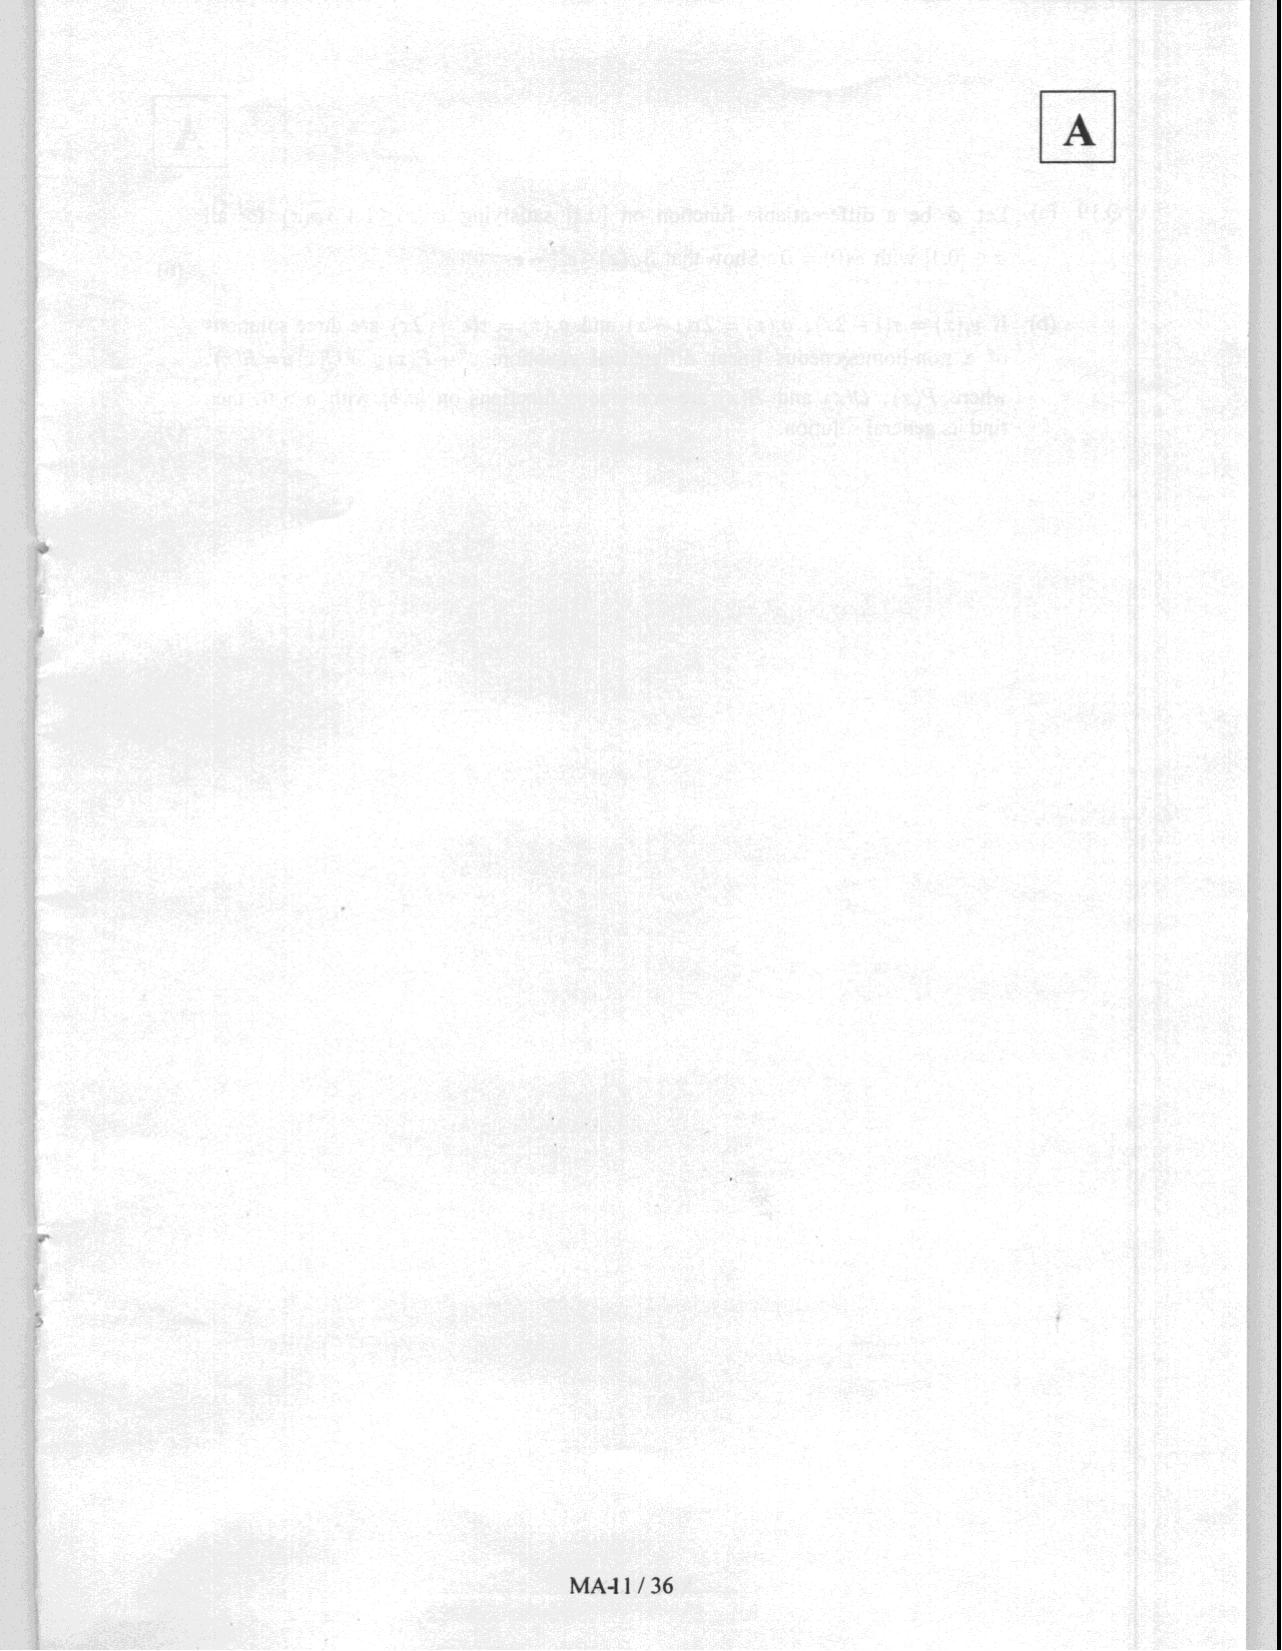 JAM 2008: MA Question Paper - Page 13